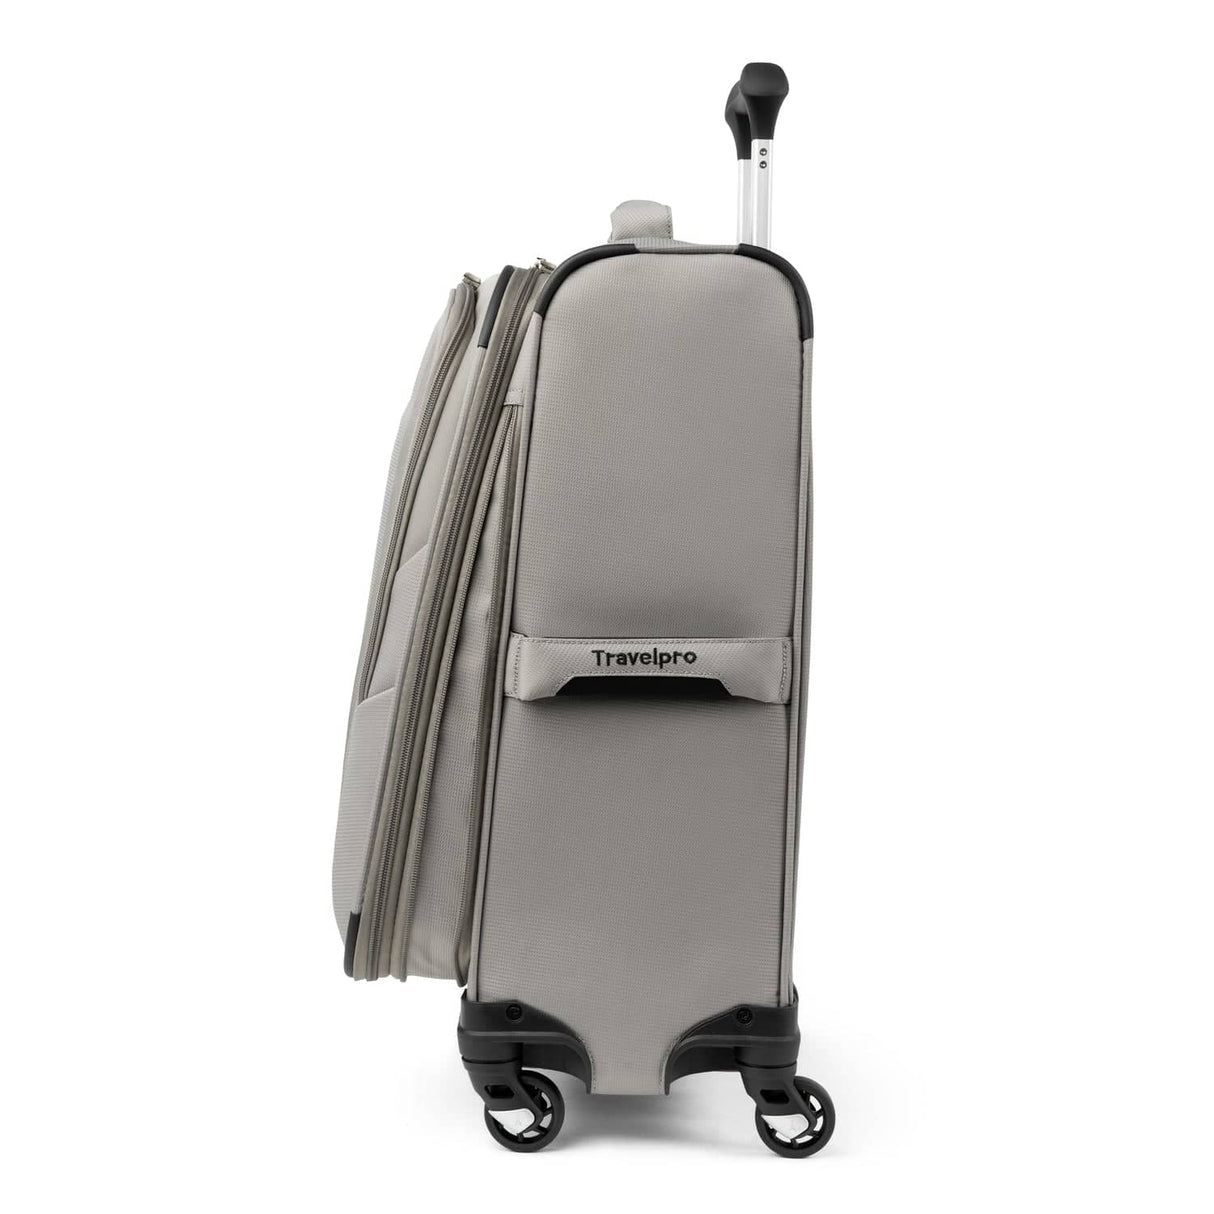 Travelpro Maxlite 5 21" Carry-On Expandable Spinner , , 401176135_side2-1500x1500-f3a2c67_1024x1024_2x_8fbe4893-4804-4ad3-991c-a8734677f631